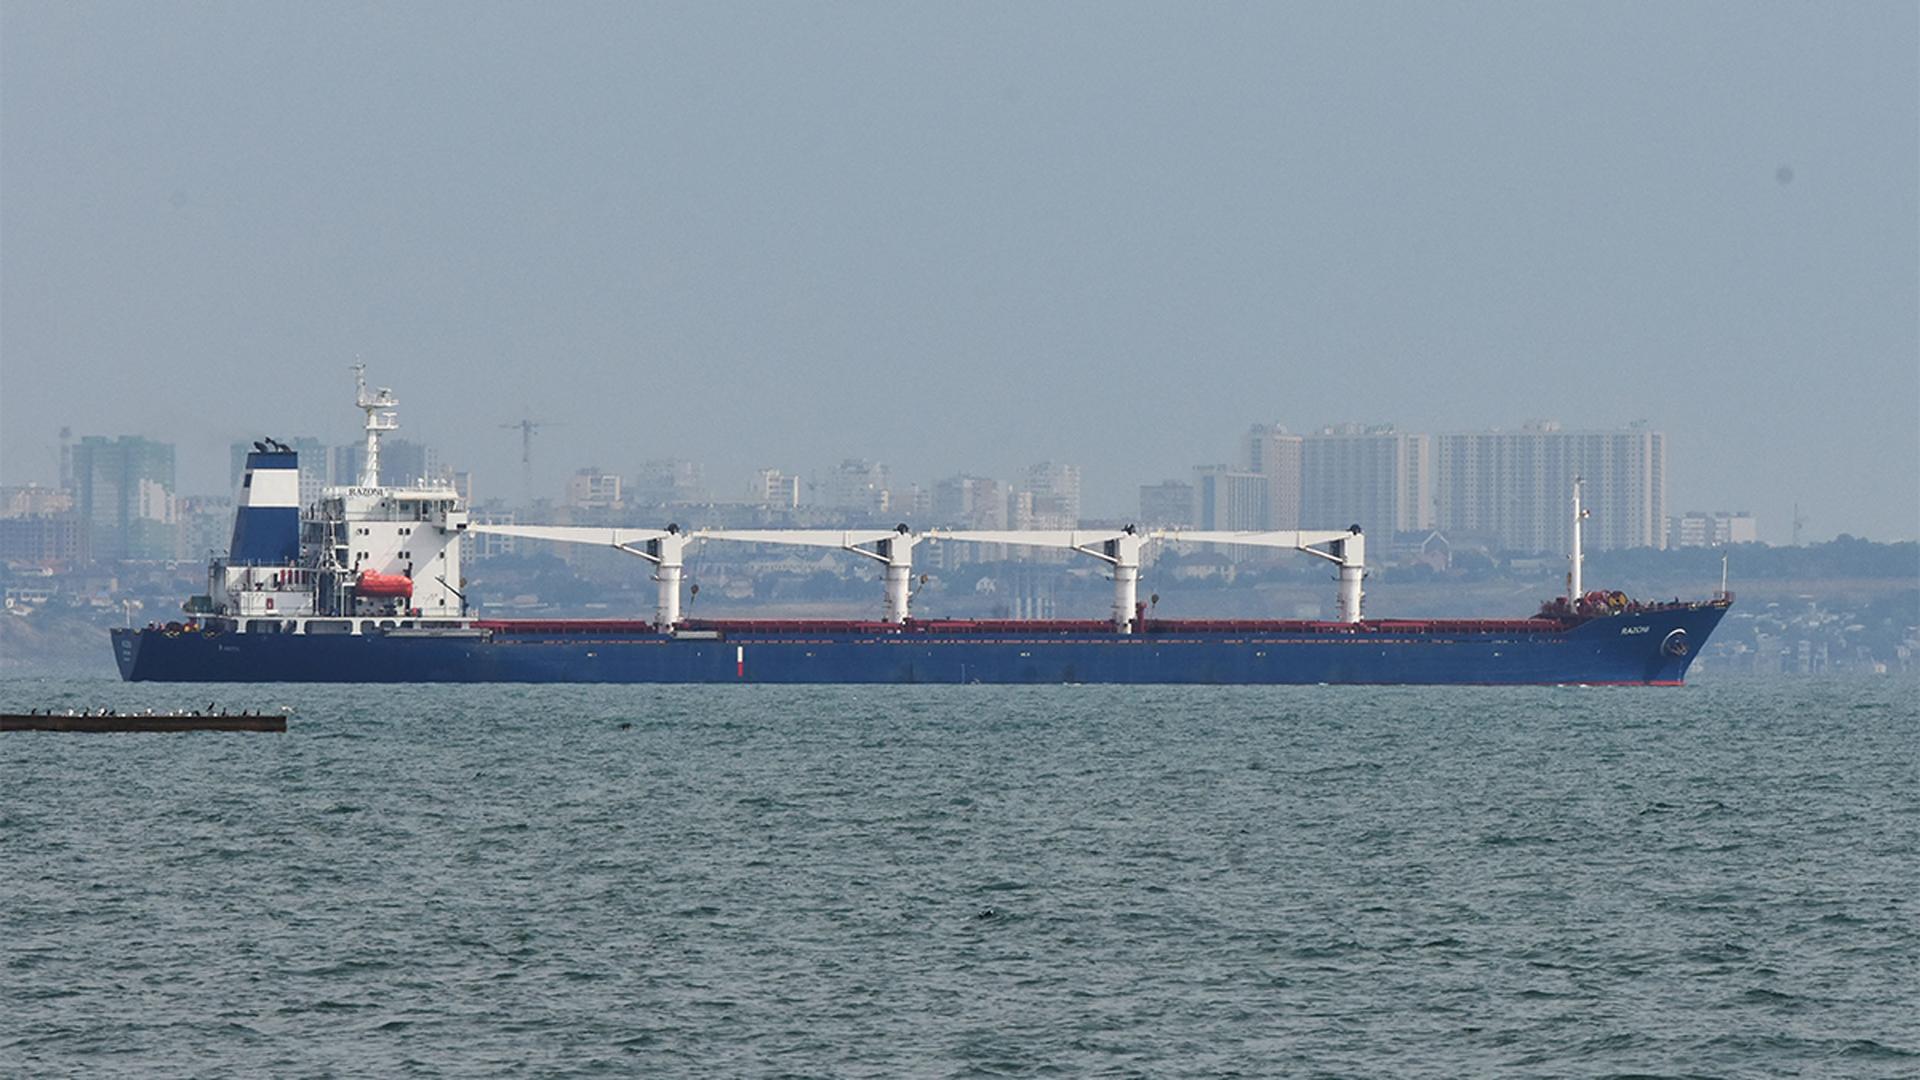 The bulk carrier Razoni starts its way from the port in Odesa, Ukraine